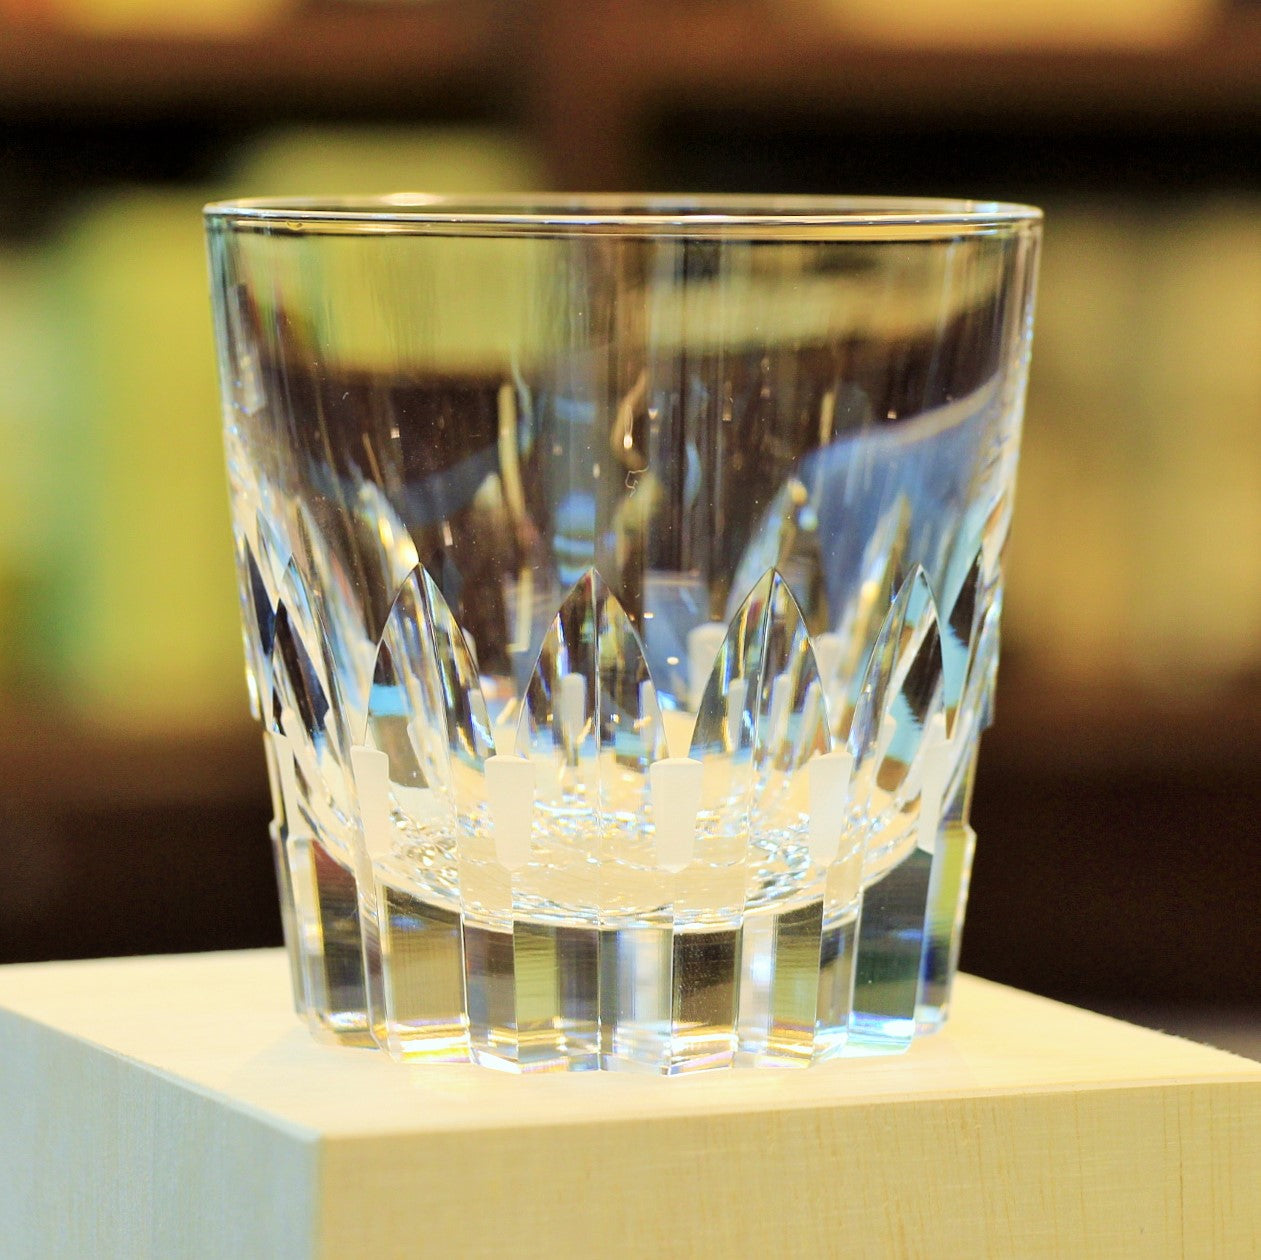 Glassware from Japan for Single Malt Scotch Whisky. Hand cut and handcrafted these glasses are exquisite in quality and appearance. Kagami Crystal